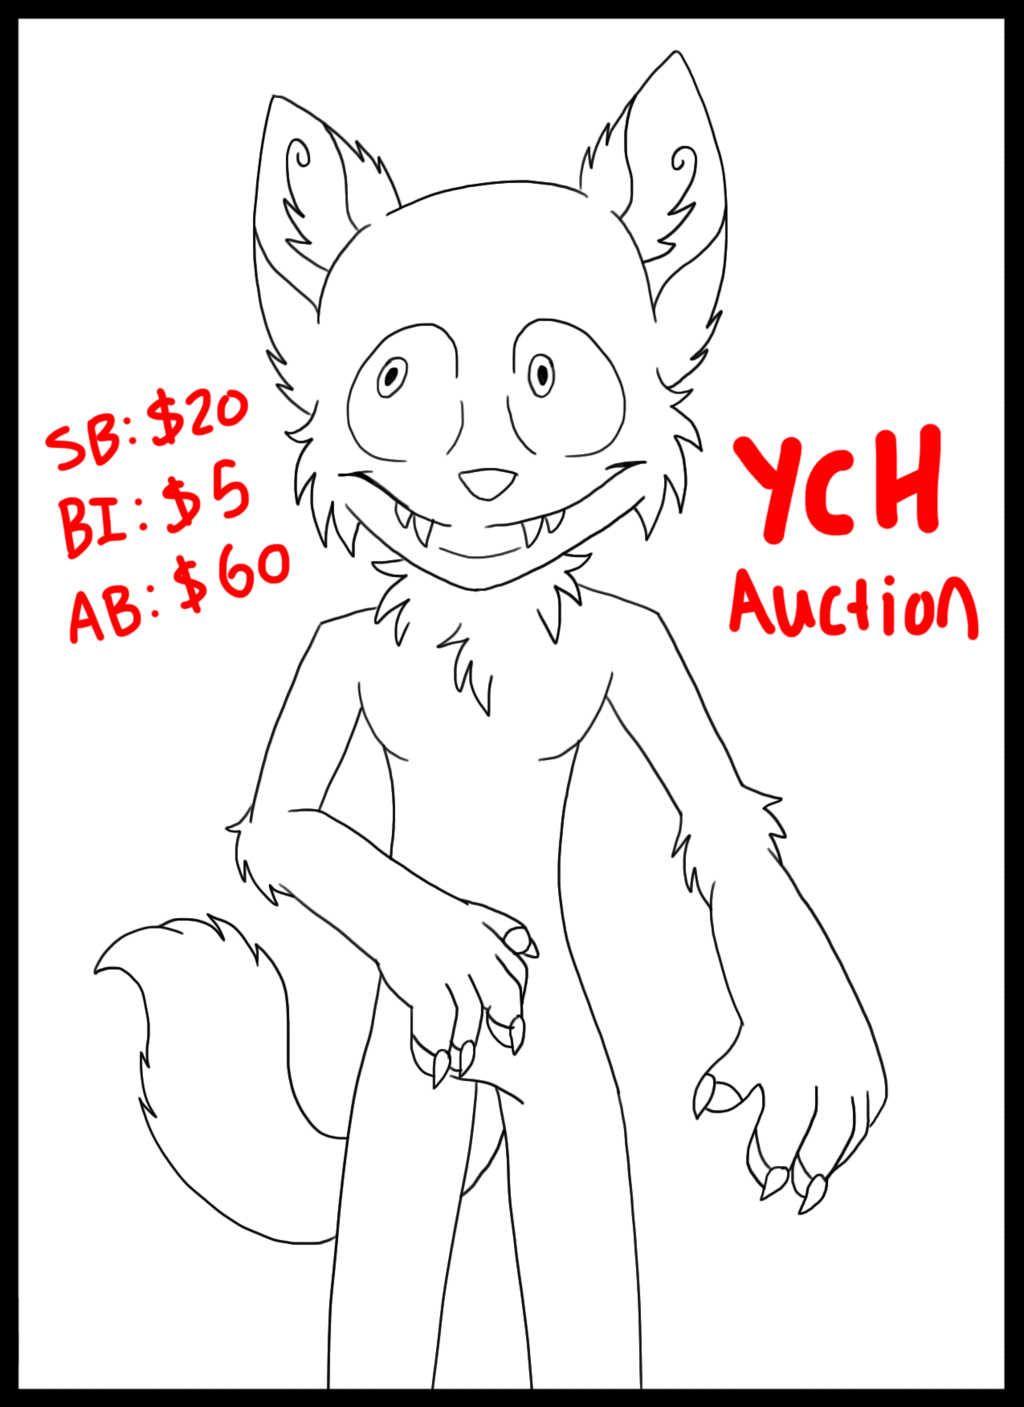 YCH Auction - Toony